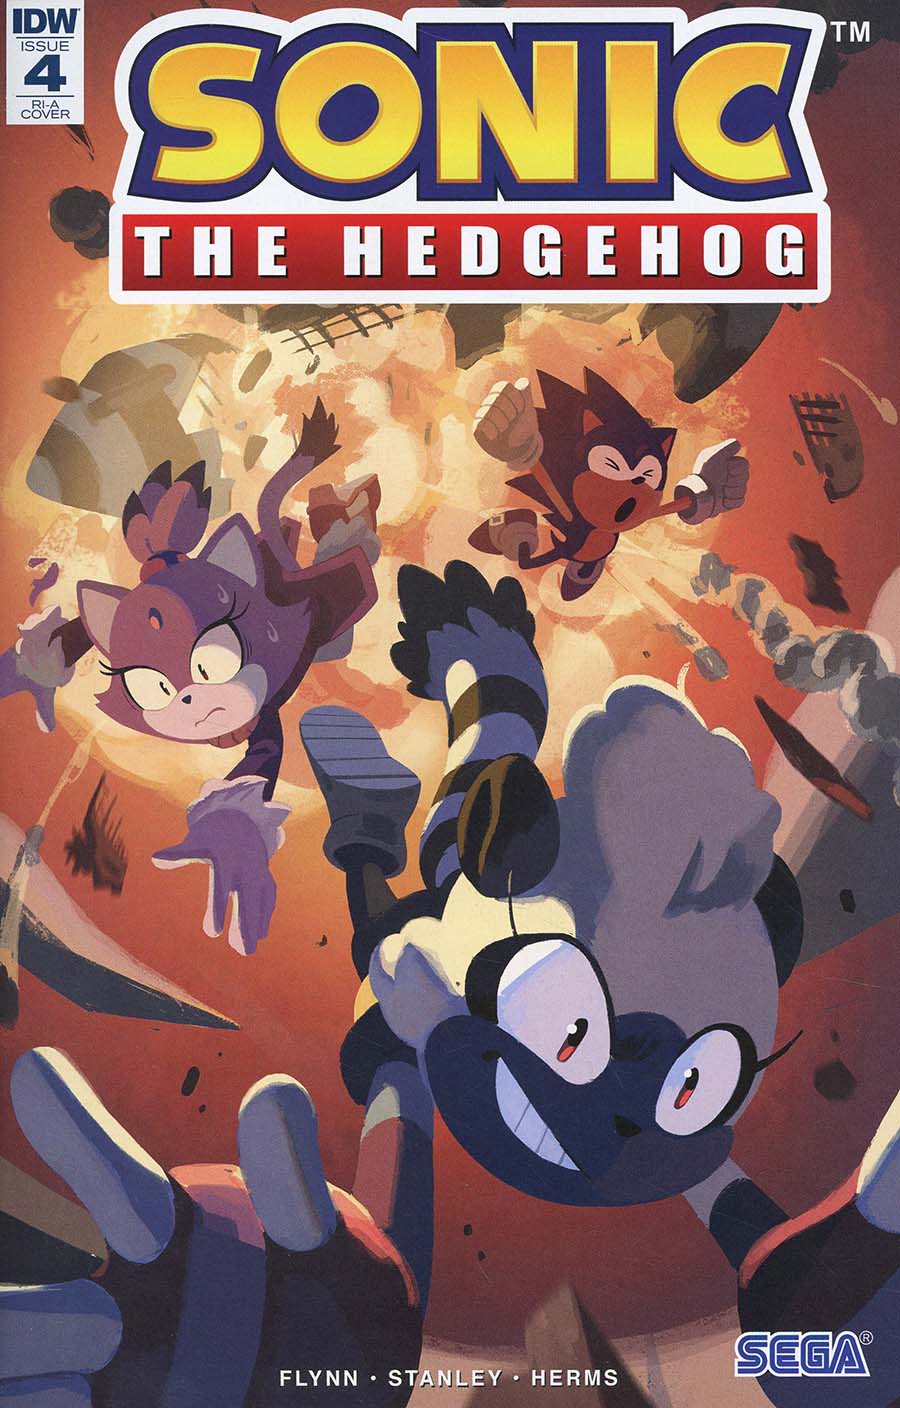 Sonic The Hedgehog Vol 3 #4 Cover C Incentive Nathalie Fourdraine Variant Cover